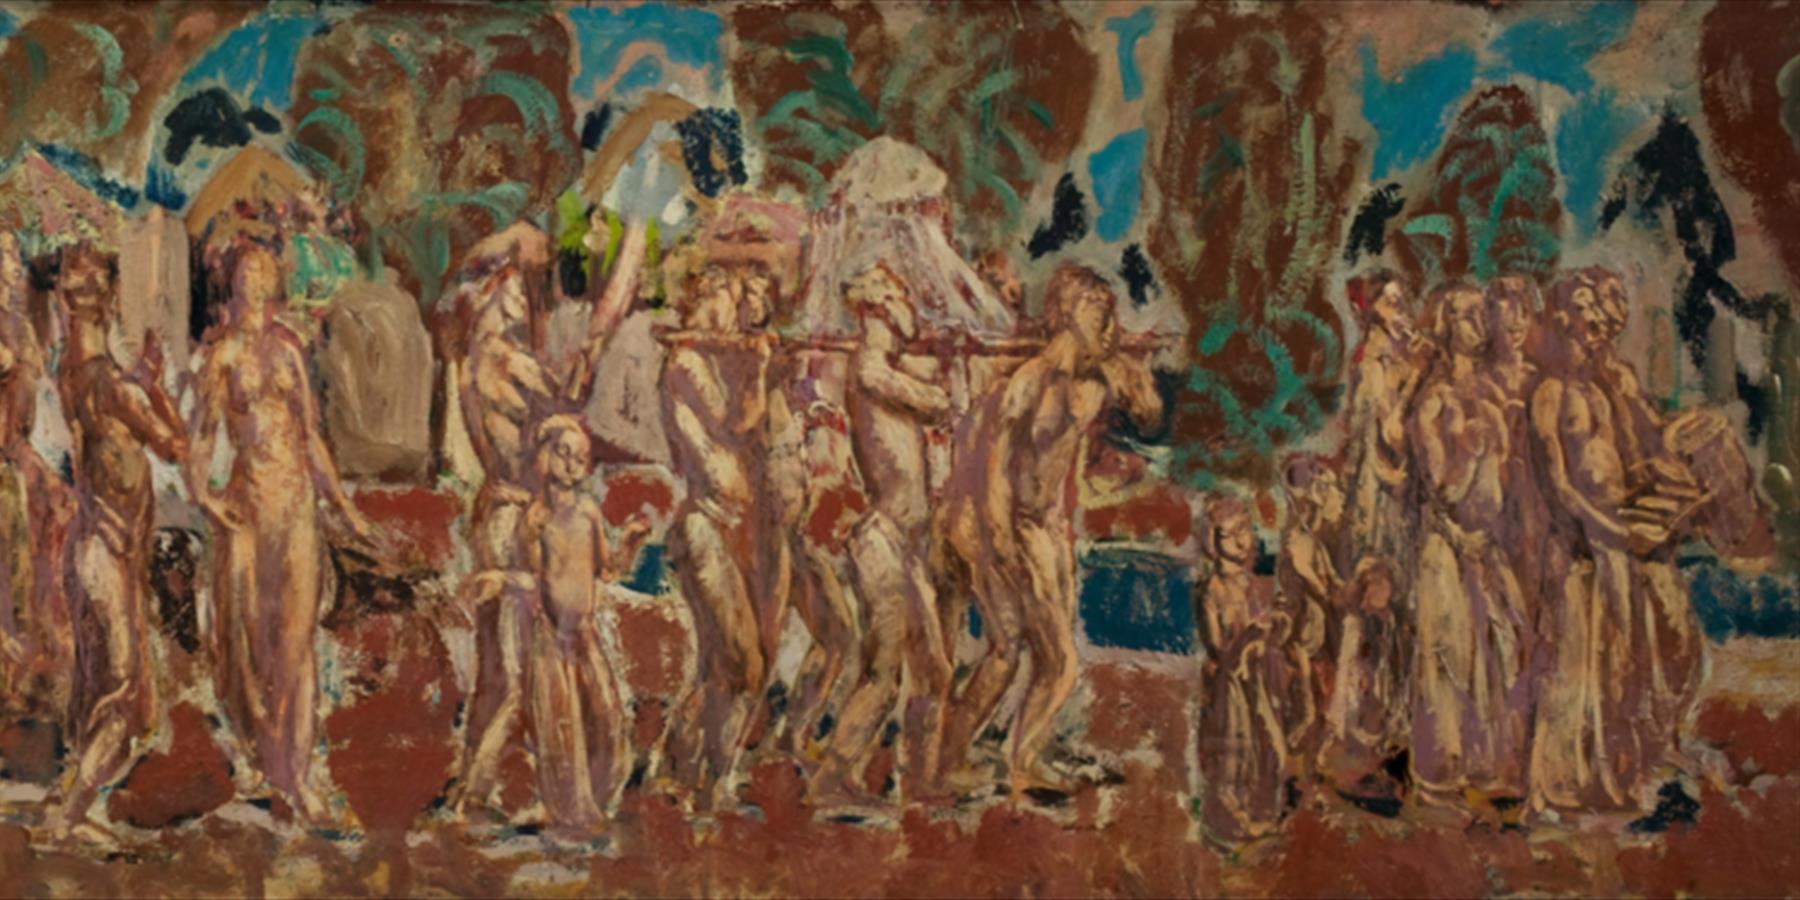 Procession in Bali: A World in a Painting